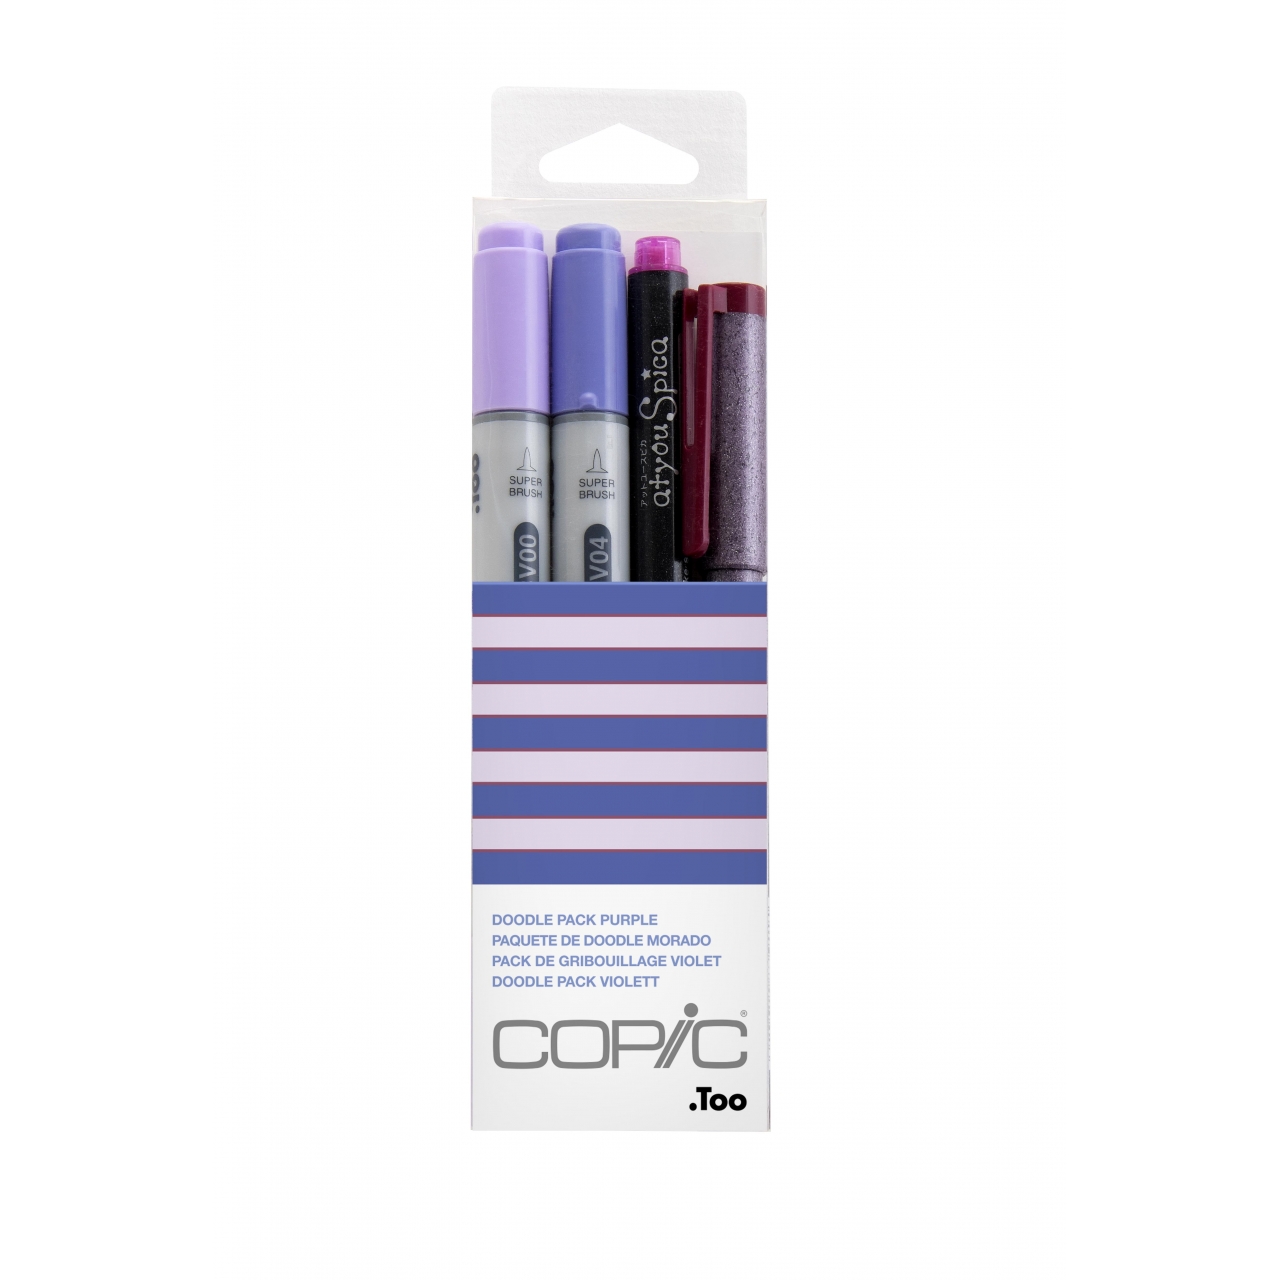 Ciao Doodle Pack Purple